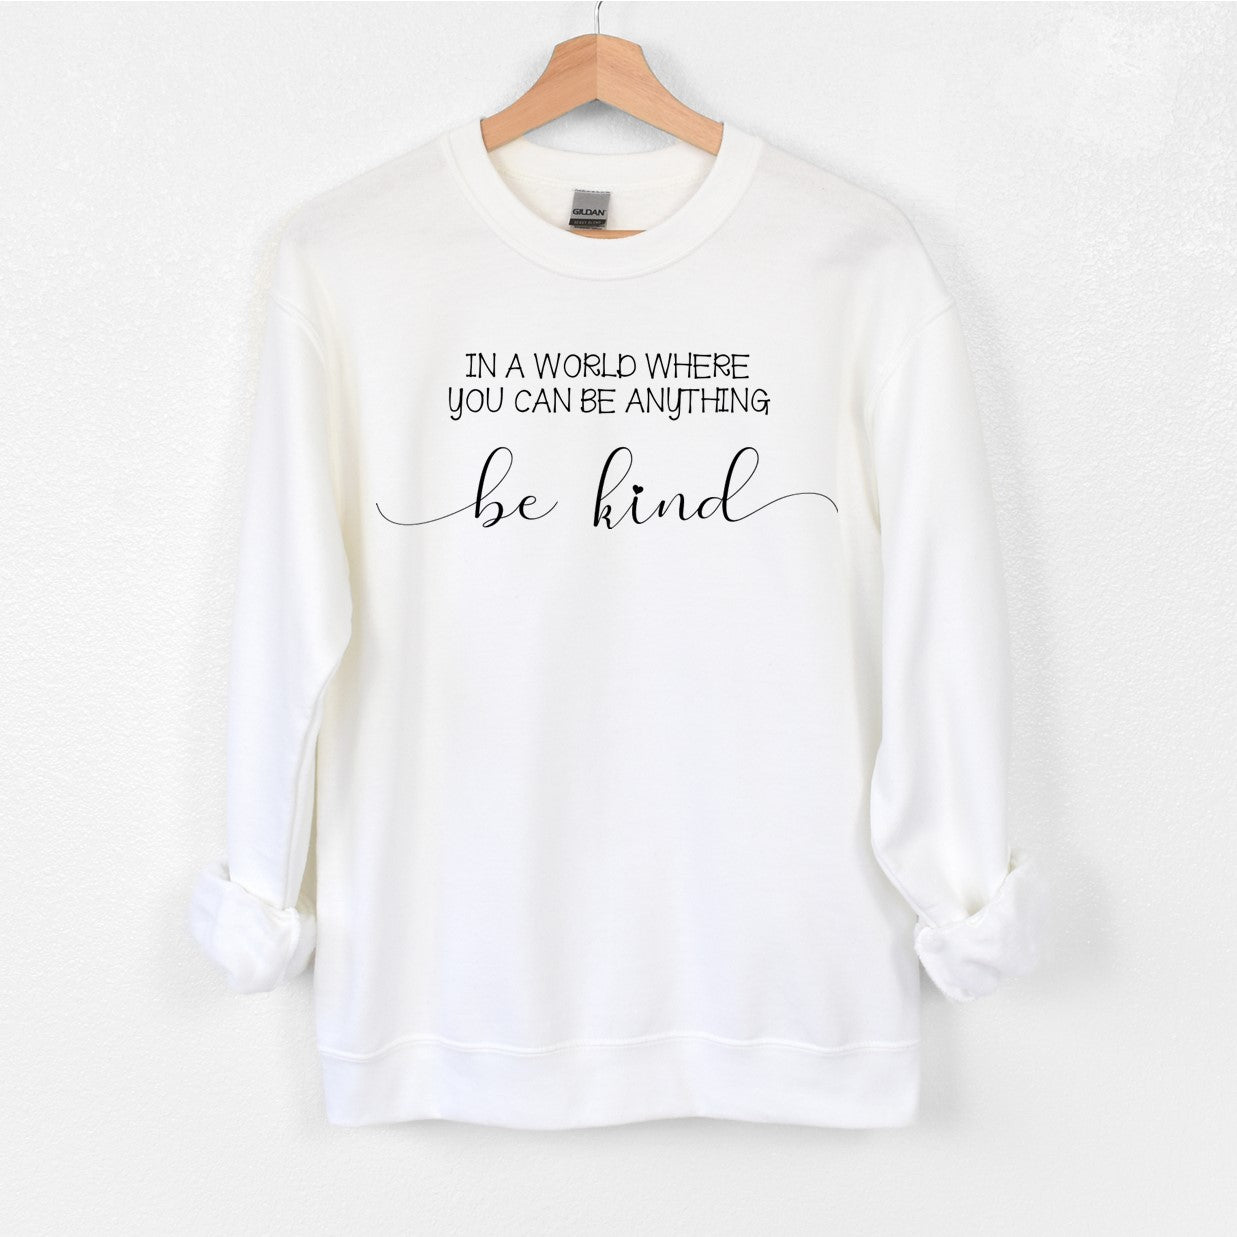 In a world where you can be anything...BE KIND- Tee or Sweatshirt